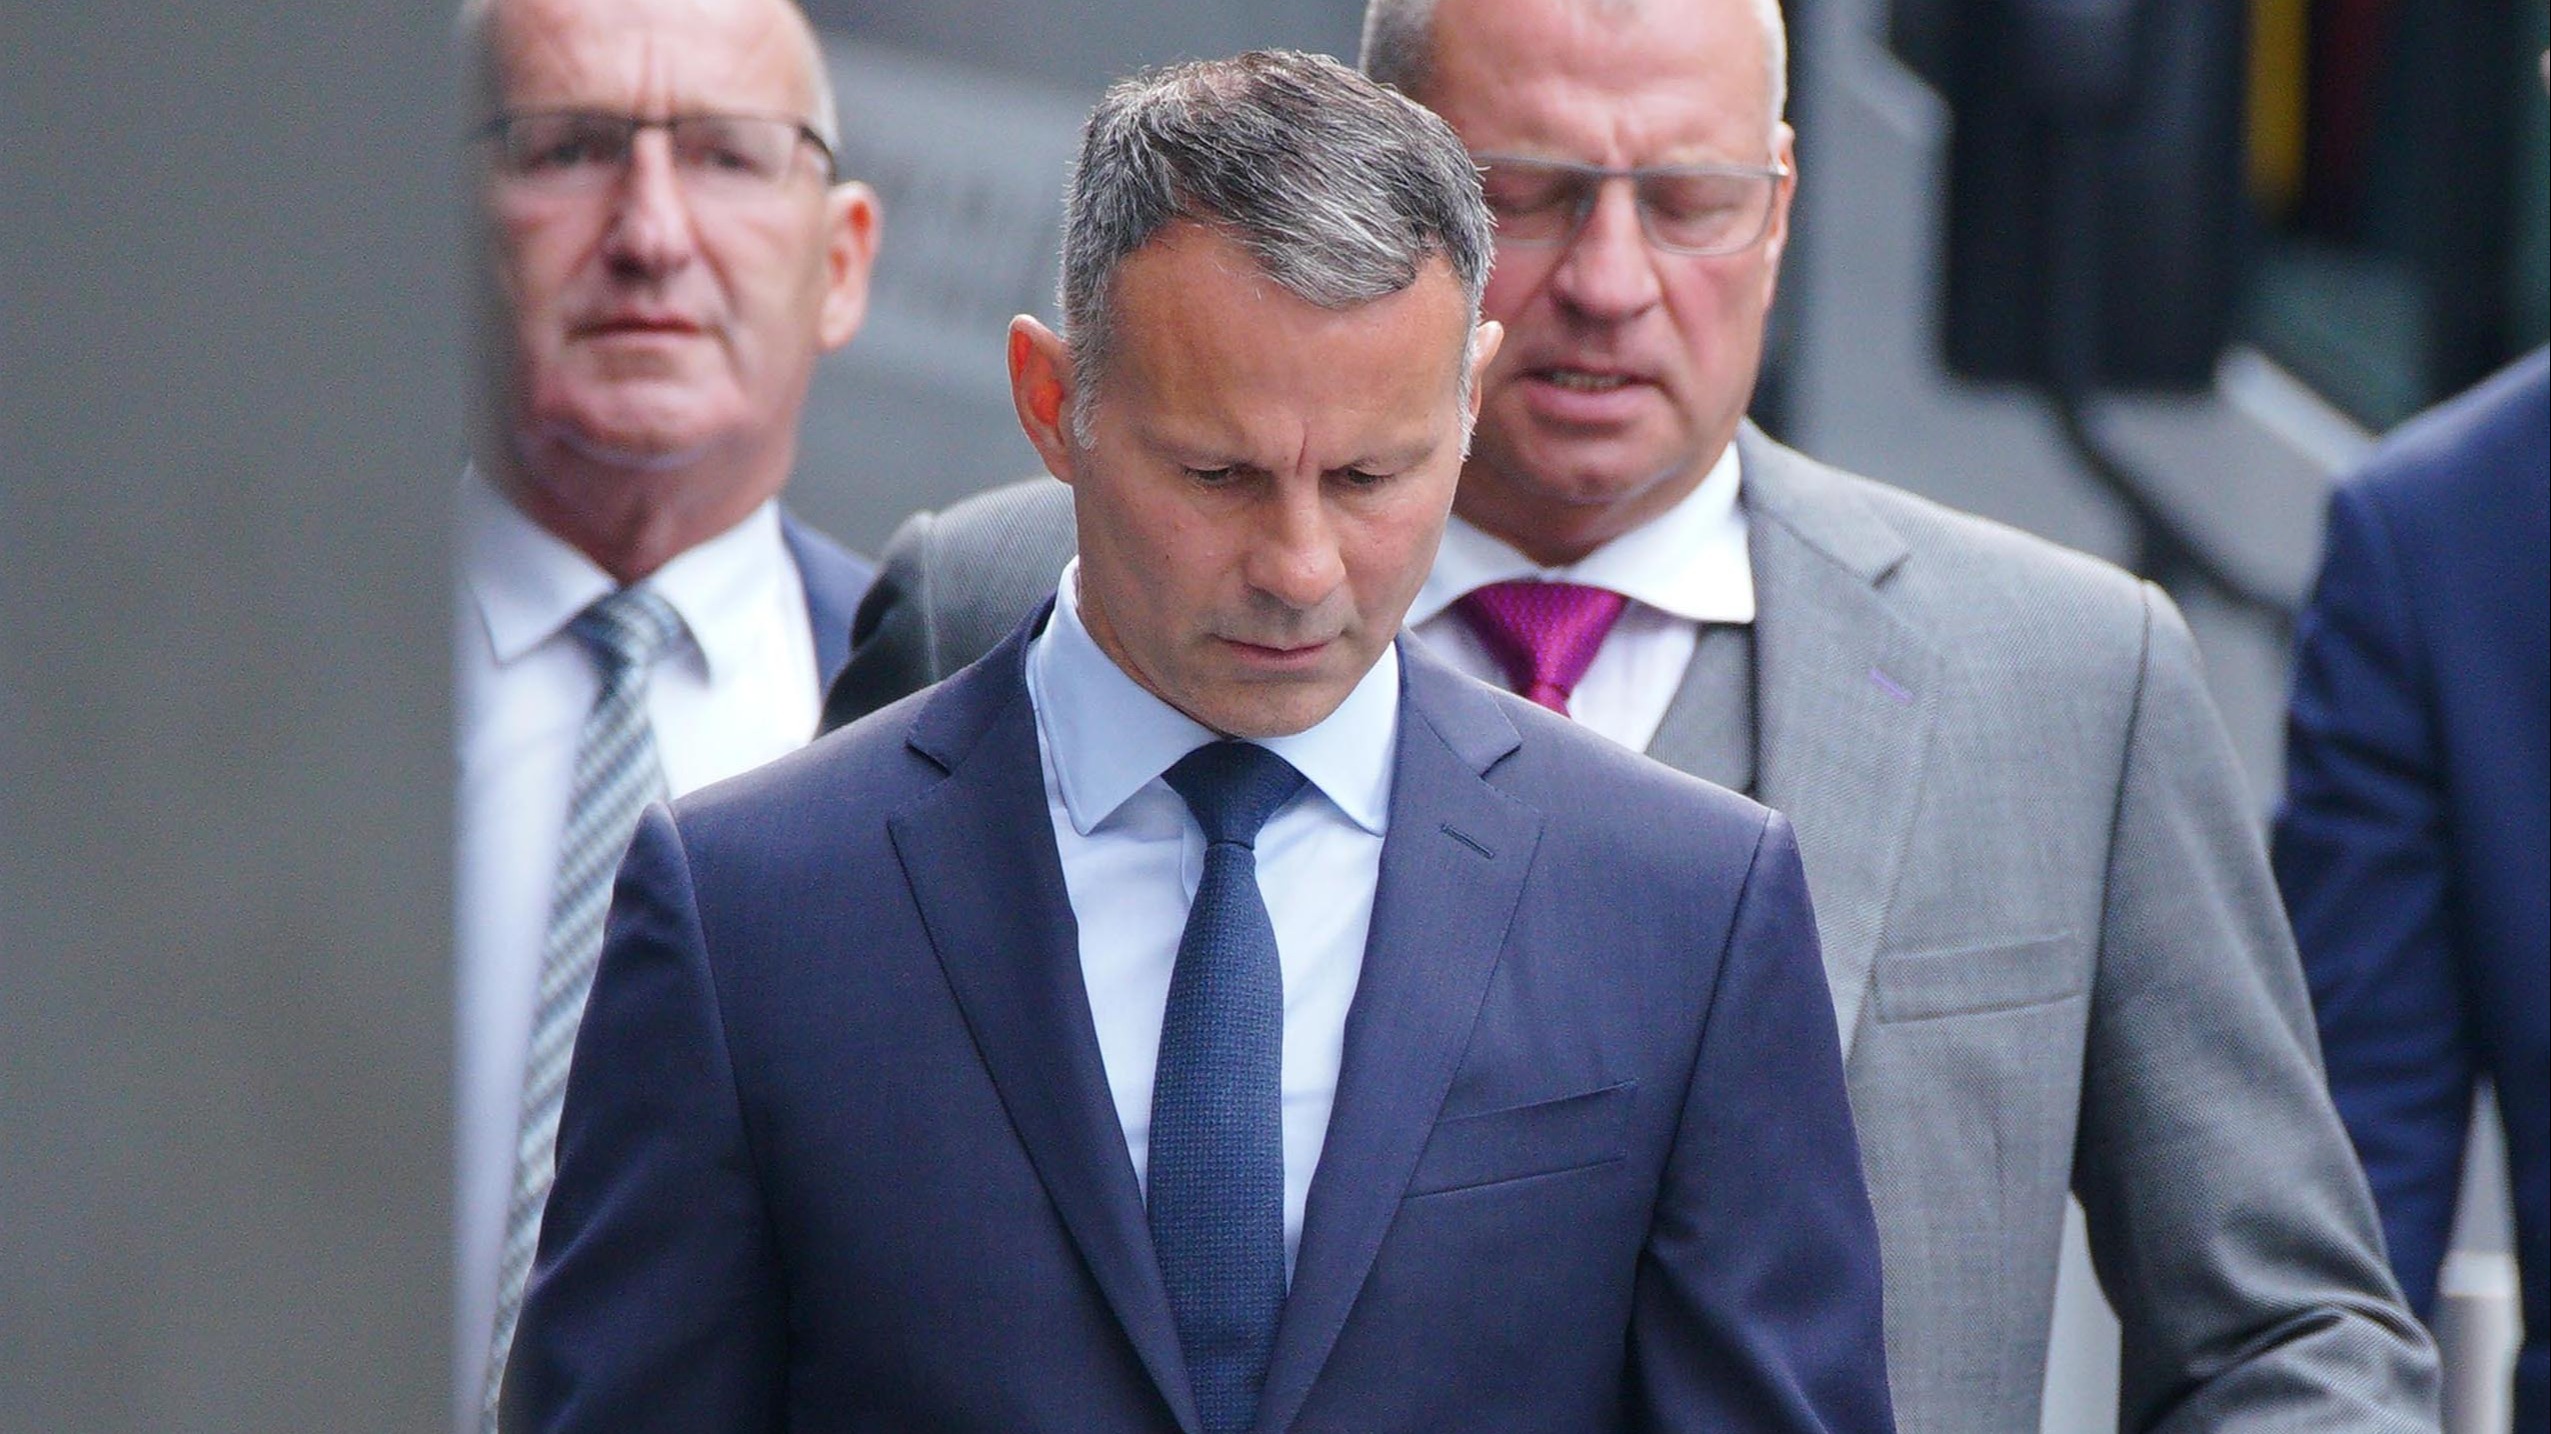 Ryan Giggs agrees he wanted to have his cake and eat it as he admits serial infidelity in court ITV News Granada image